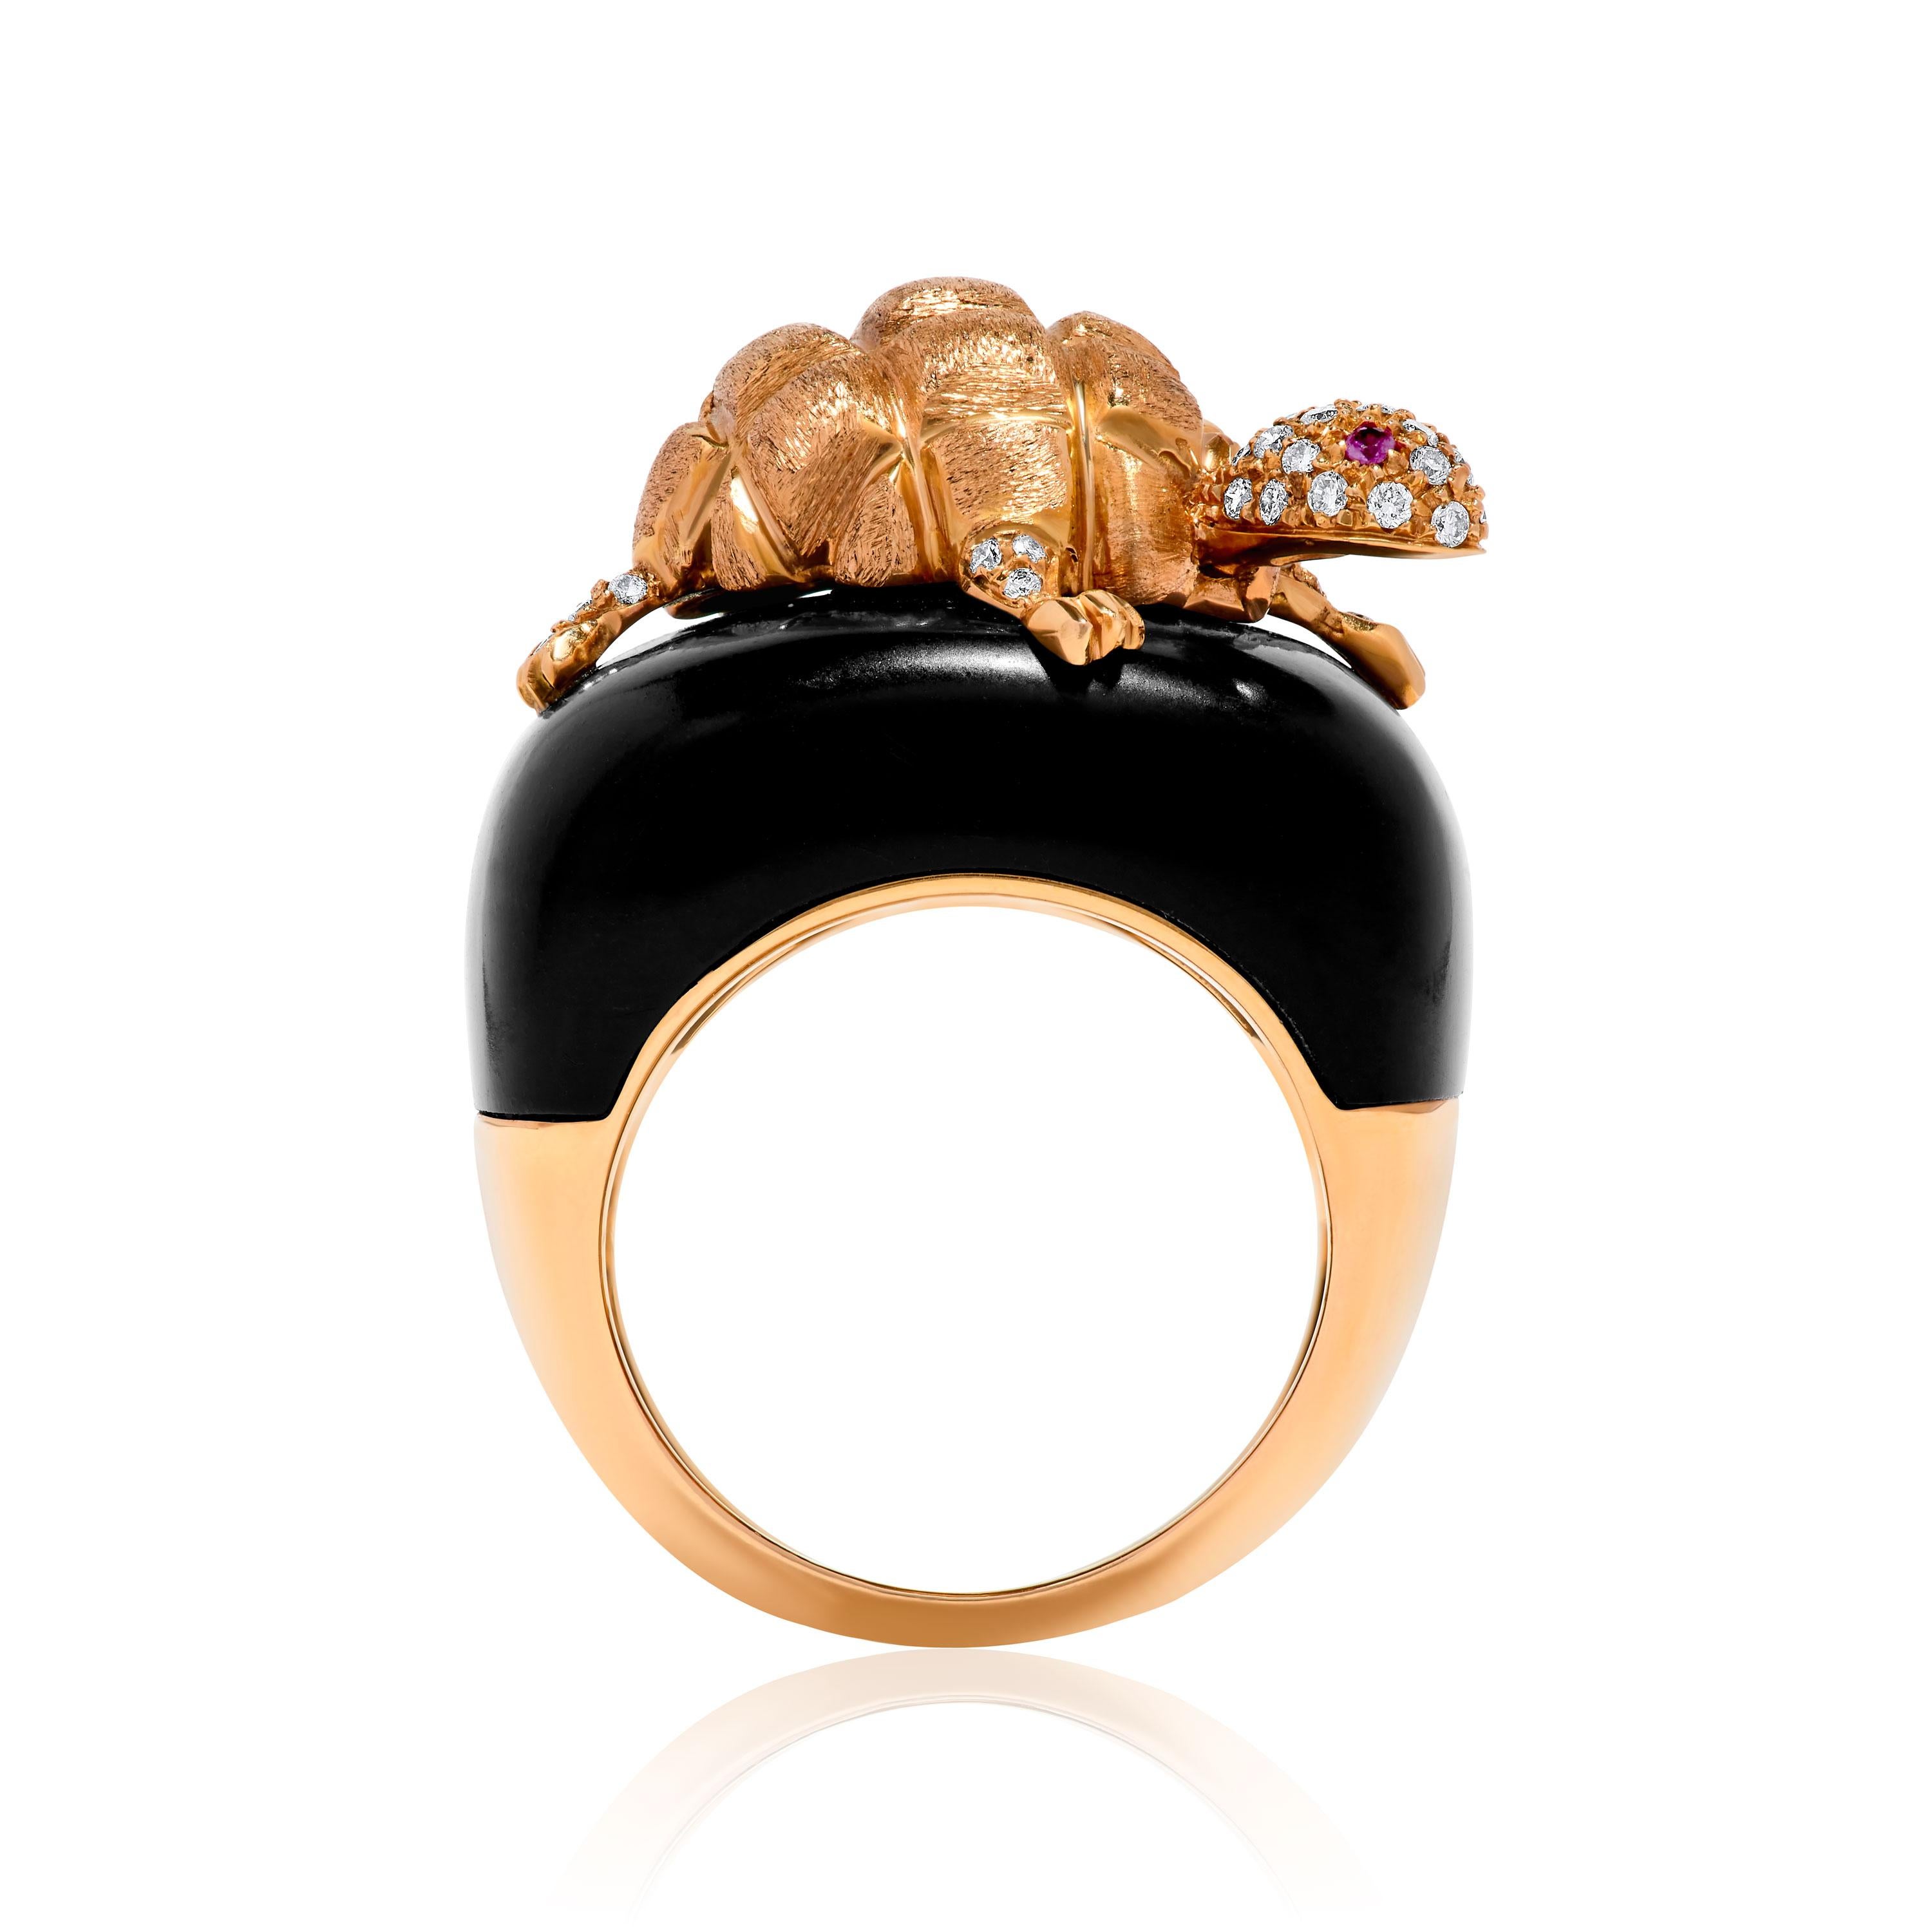 Andreoli Diamond Pink Sapphire Onyx 18 Karat Yellow Gold Turtle Ring

This ring features:
- 0.23 Carat Diamond
- 0.02 Carat Pink Sapphire
- Onyx
- 20.80 Gram 18K Yellow Gold
- Made In Italy